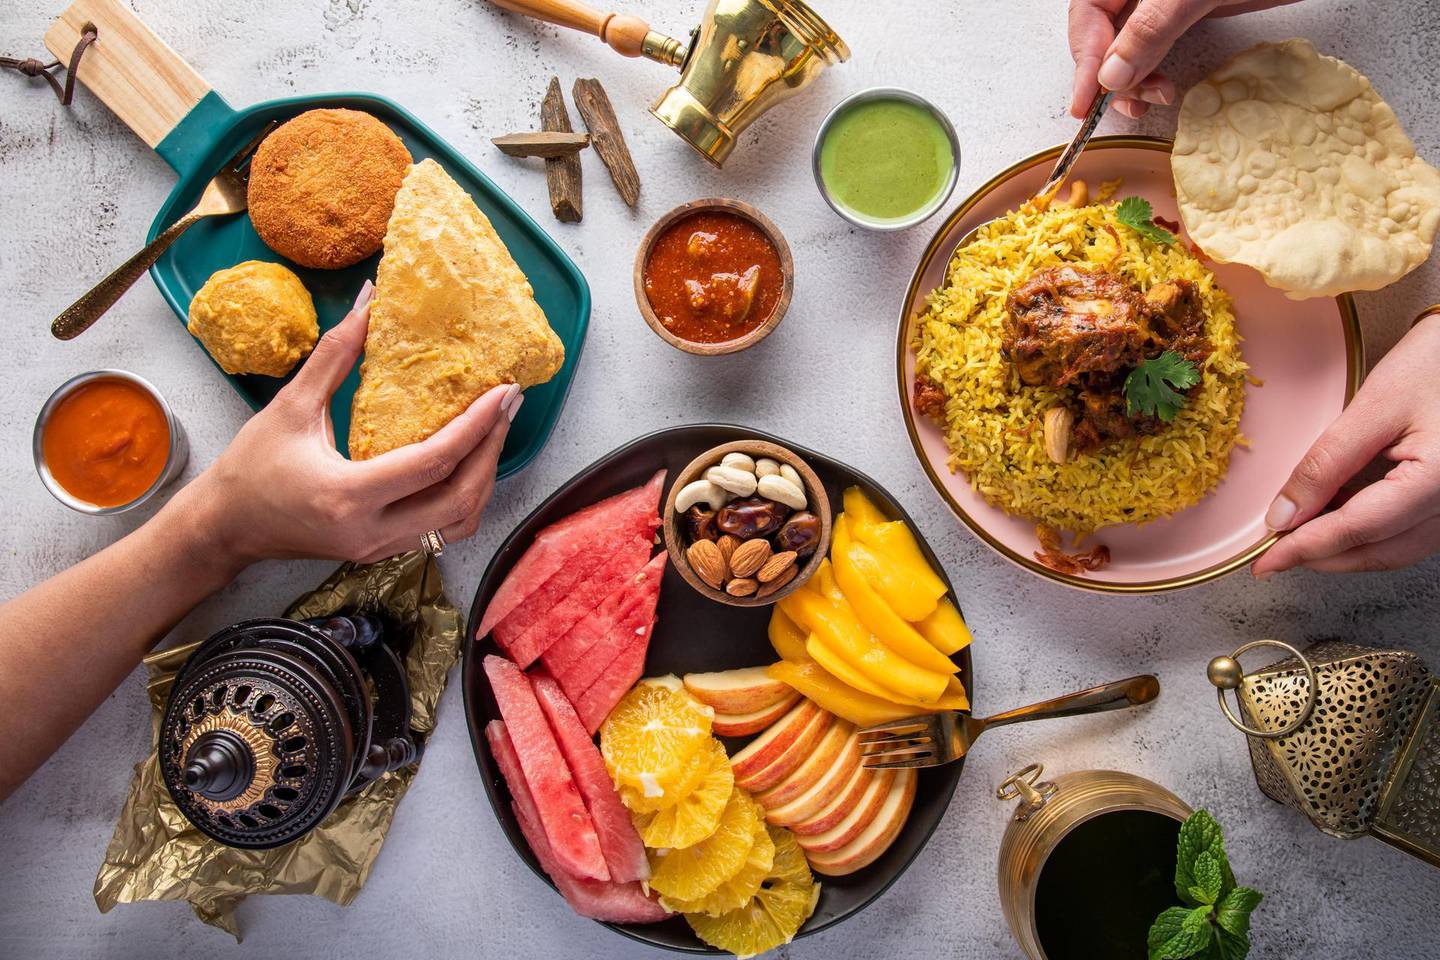 A budget iftar option from Tiffin and More. Courtesy Tiffin & More